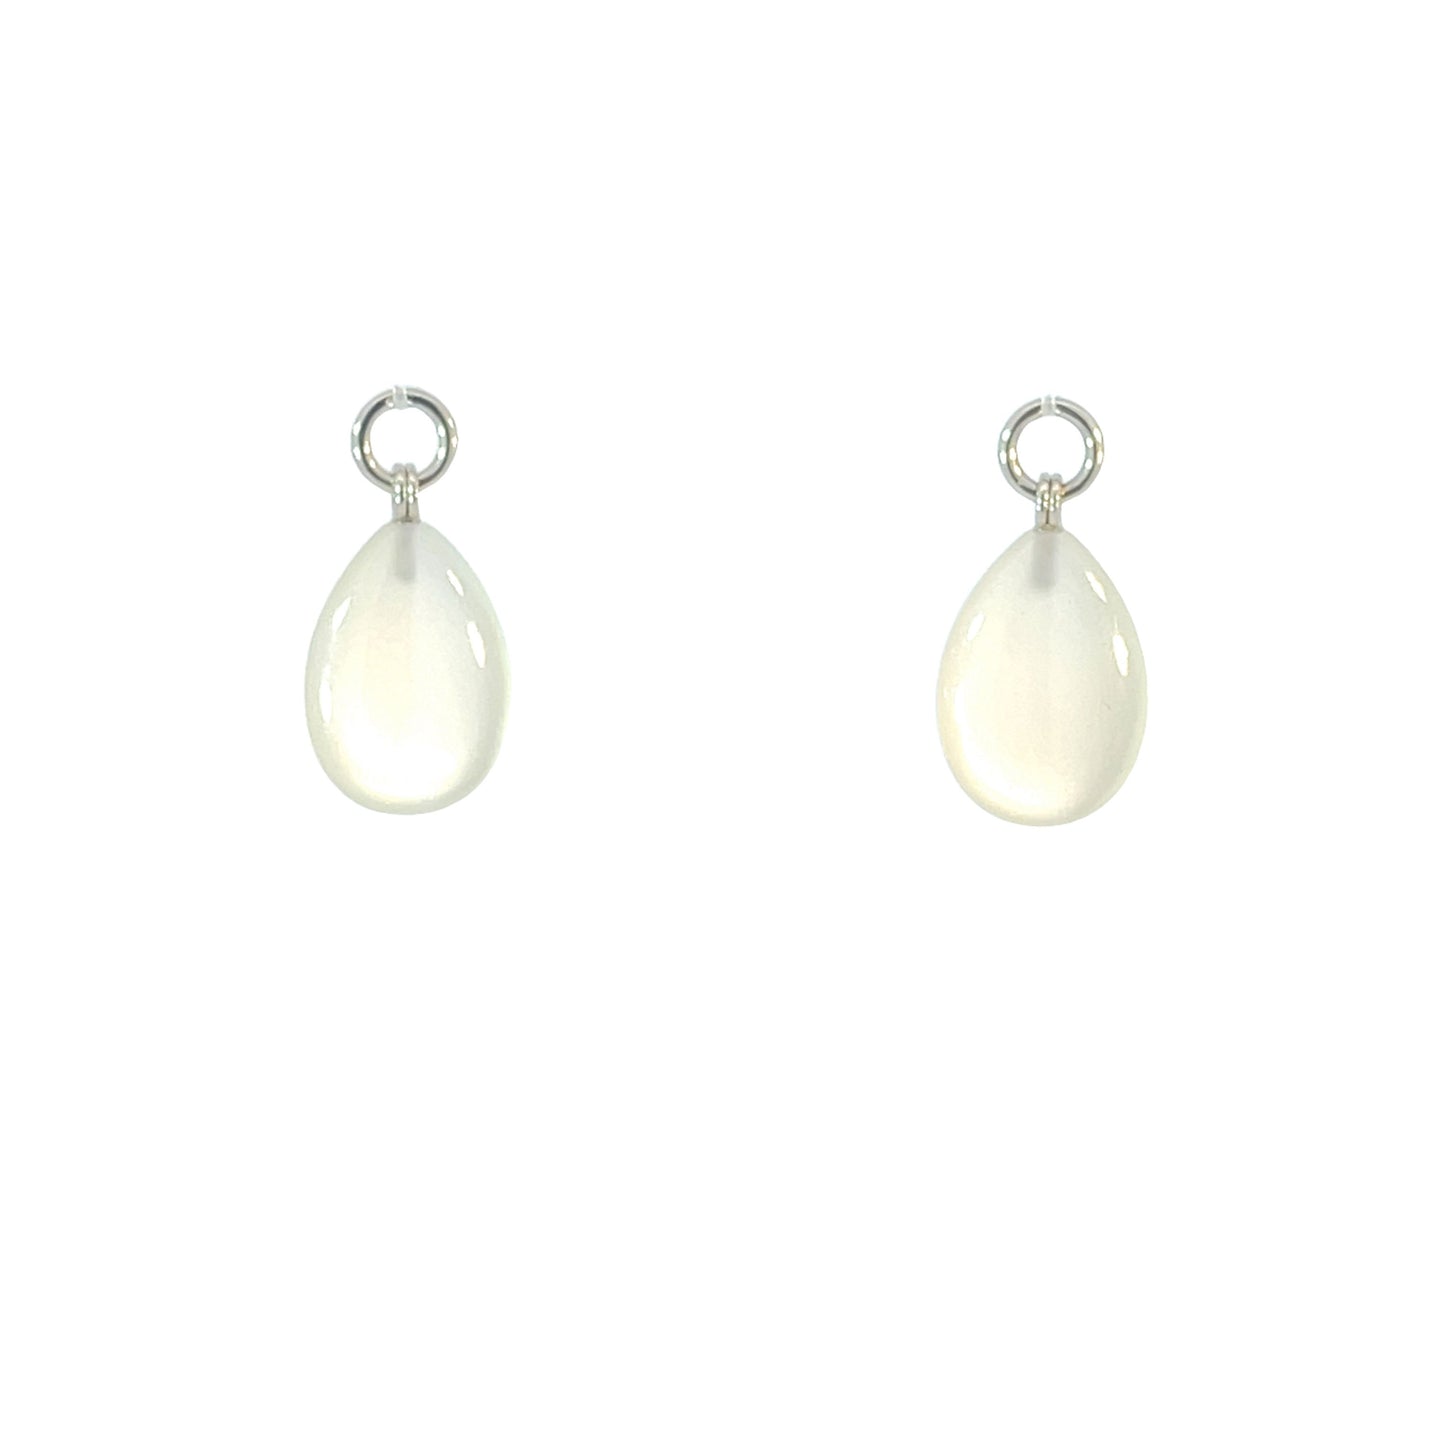 21.88 Total Carat Weight Moonstone Briolette Earring Jackets